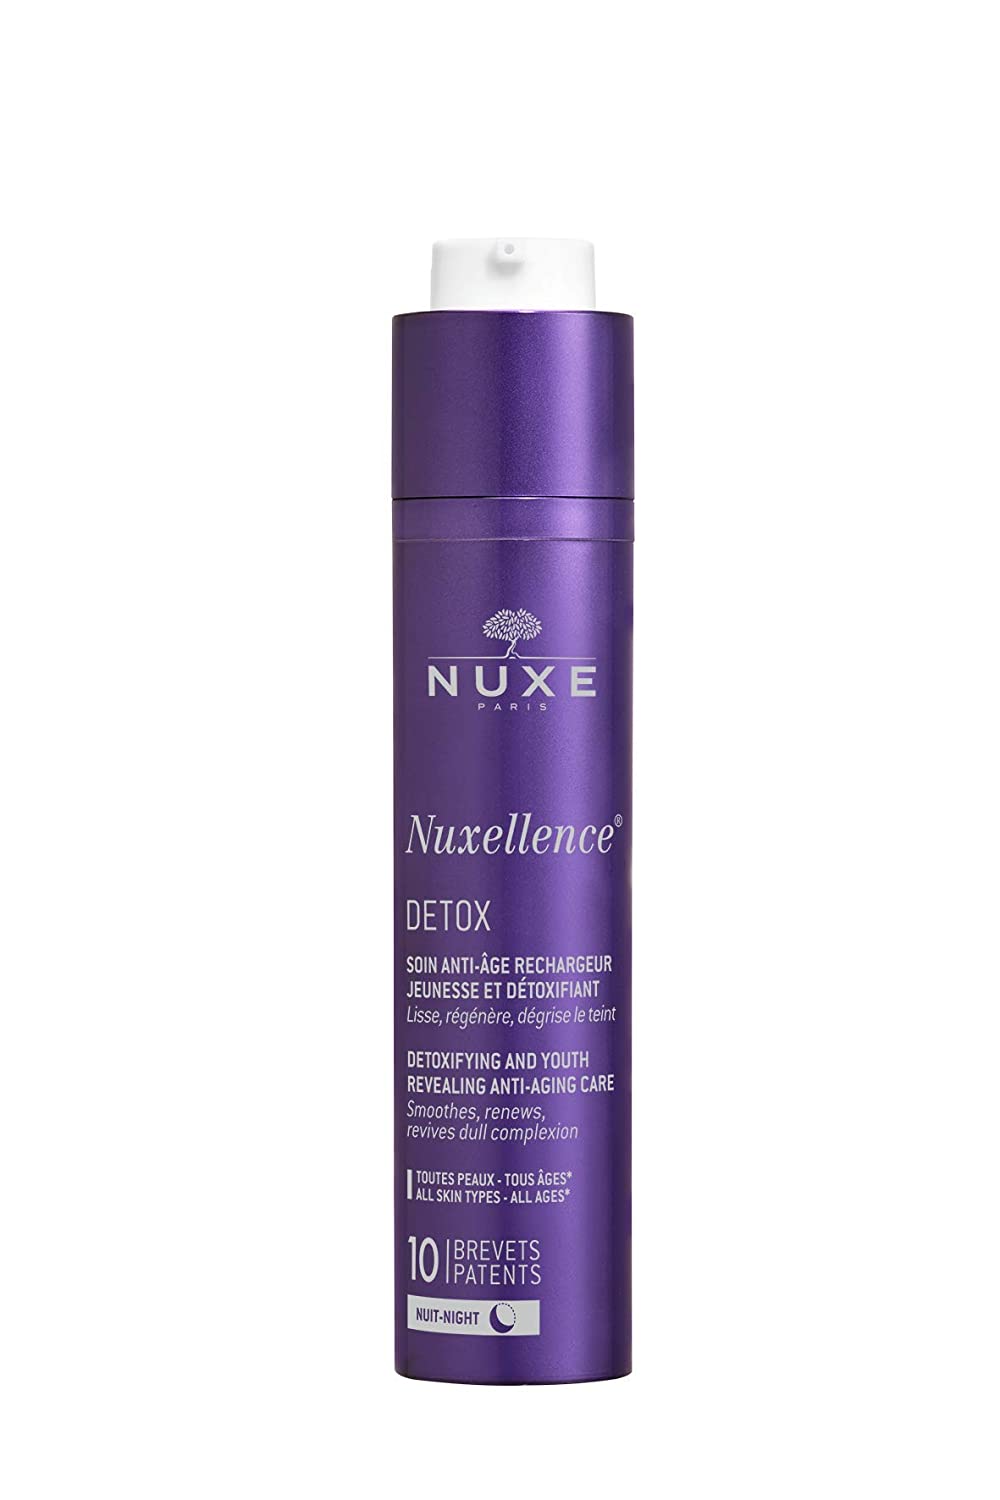 Nuxe llence Detox Detoxification Anti-Ageing Serum (1 x Pack of 1000)